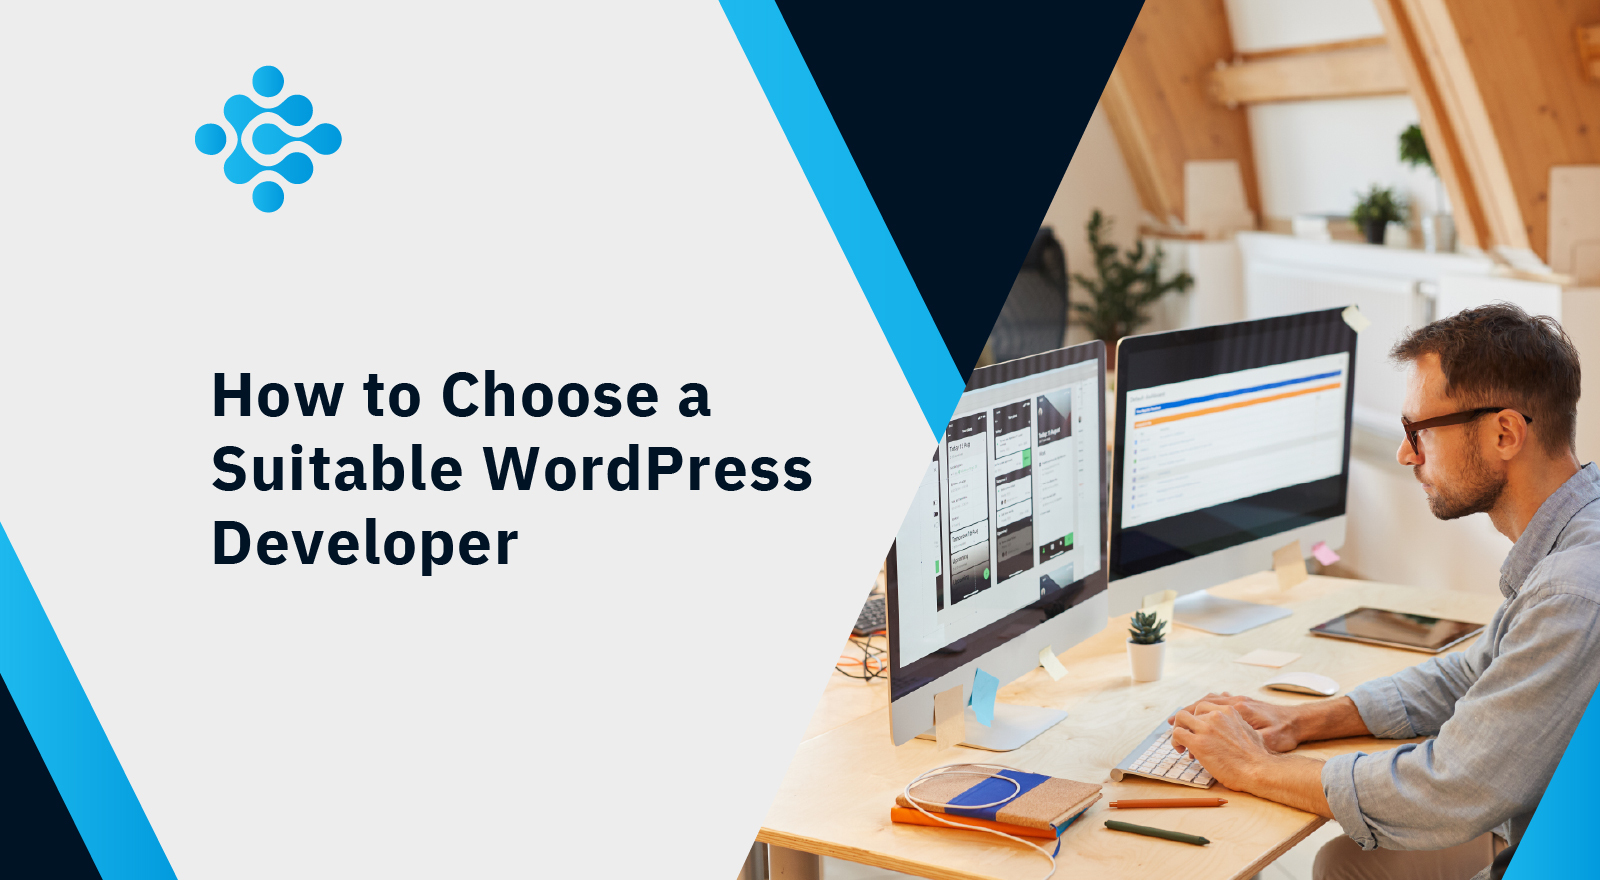 How to Choose a Suitable WordPress Developer